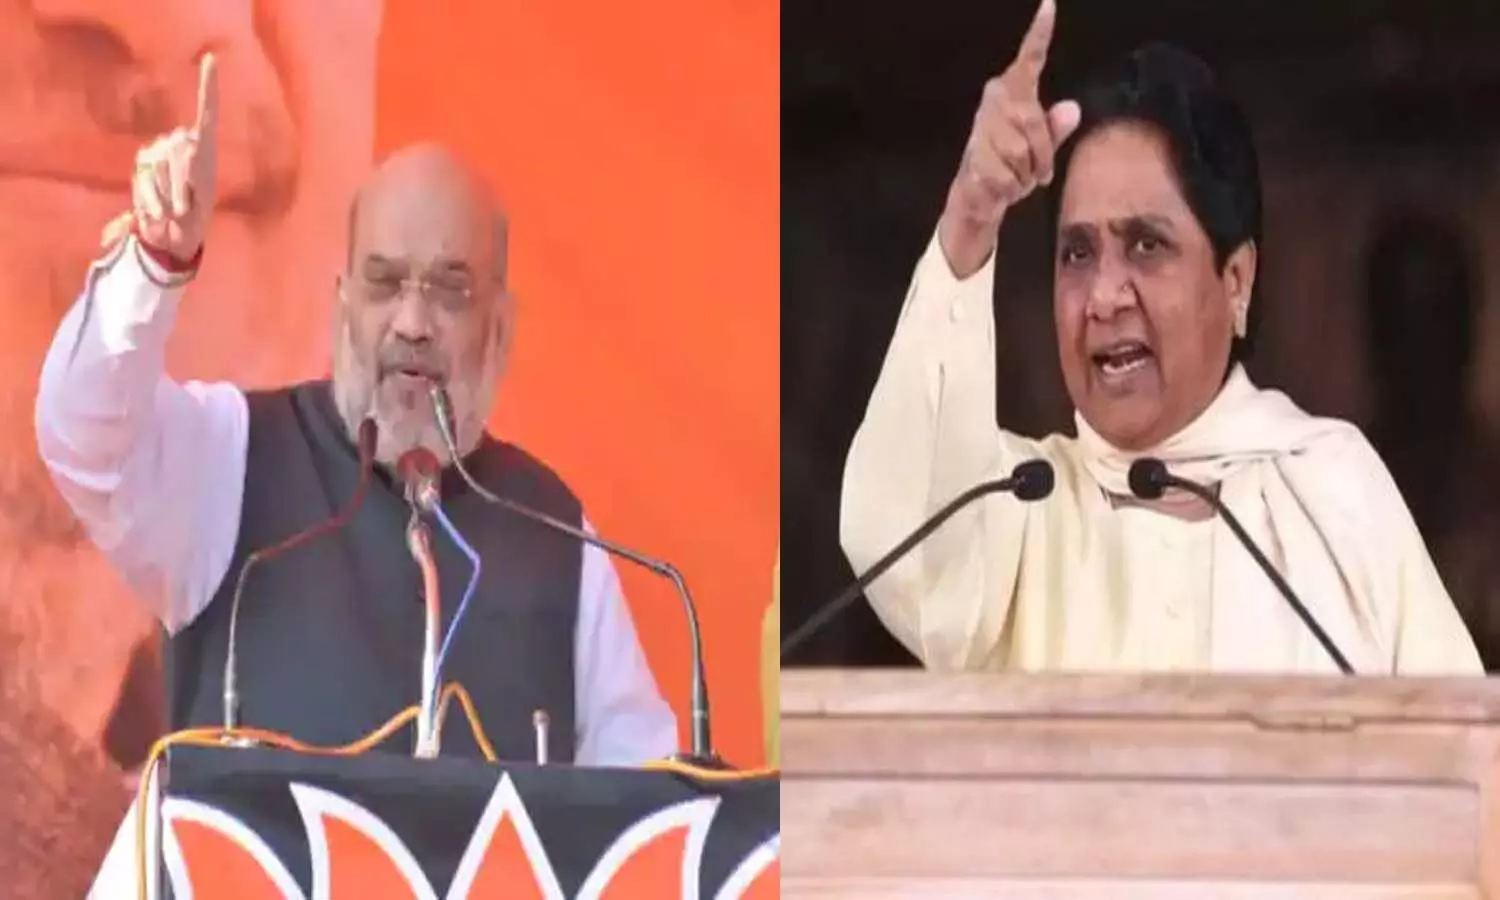 UP Election 2022: Tomorrow there will be two big faces of politics in Basti, Mayawati and Amit Shah, see full program